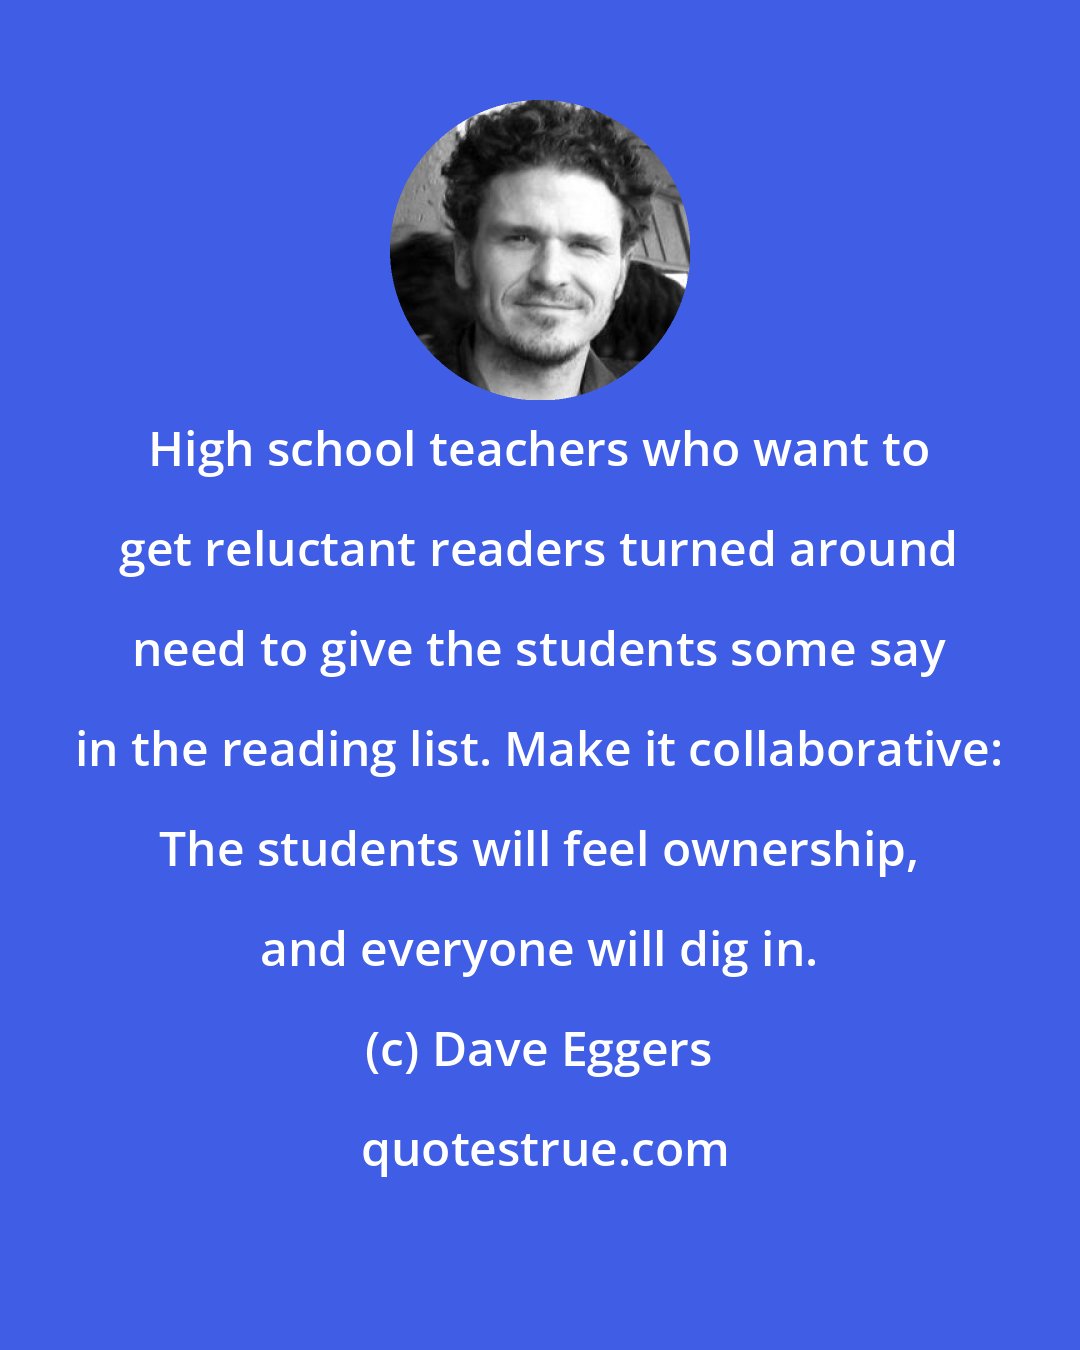 Dave Eggers: High school teachers who want to get reluctant readers turned around need to give the students some say in the reading list. Make it collaborative: The students will feel ownership, and everyone will dig in.